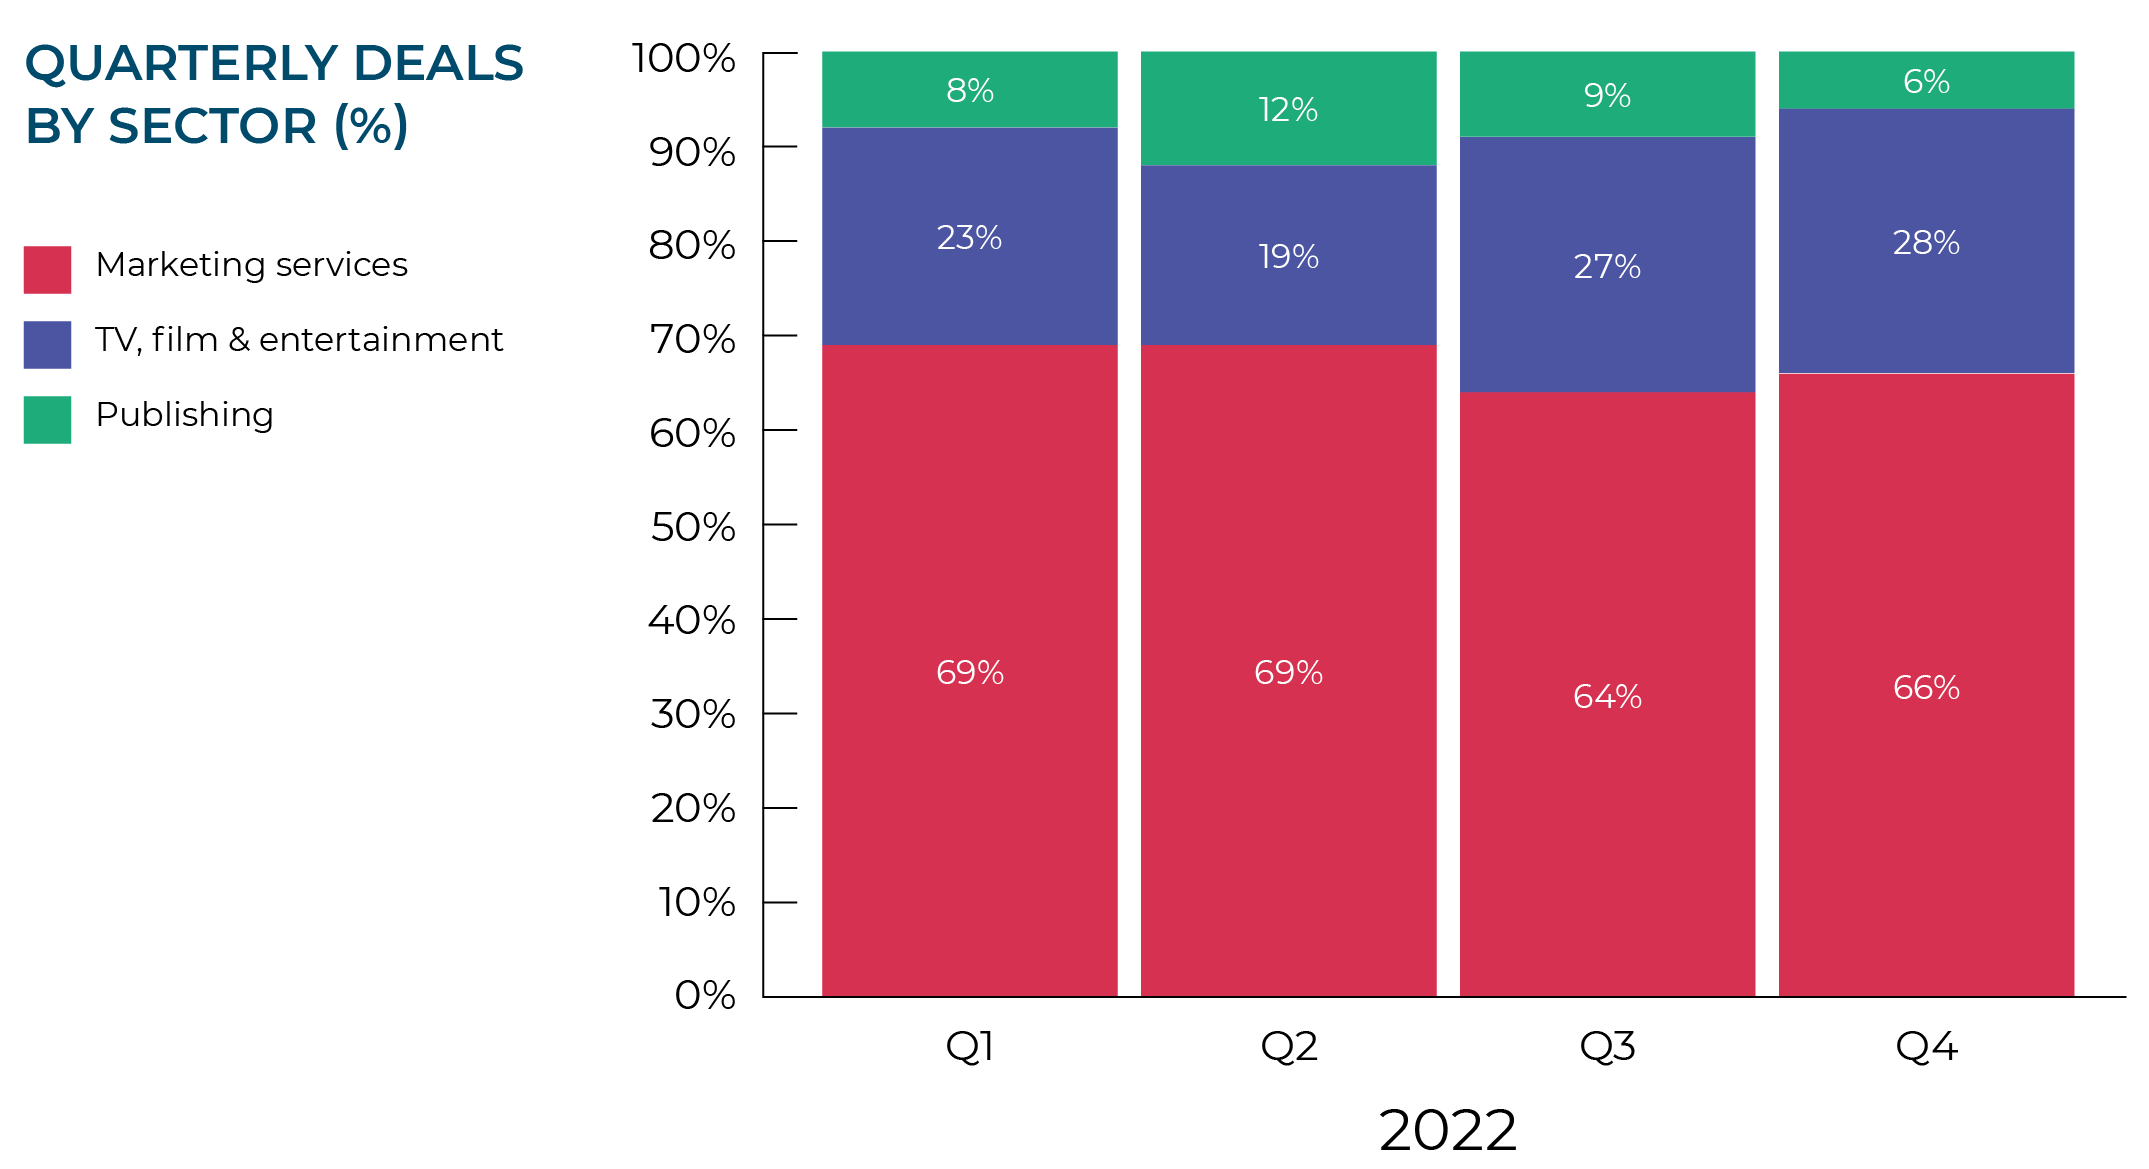 QUARTERLY DEALS BY SECTOR (%)